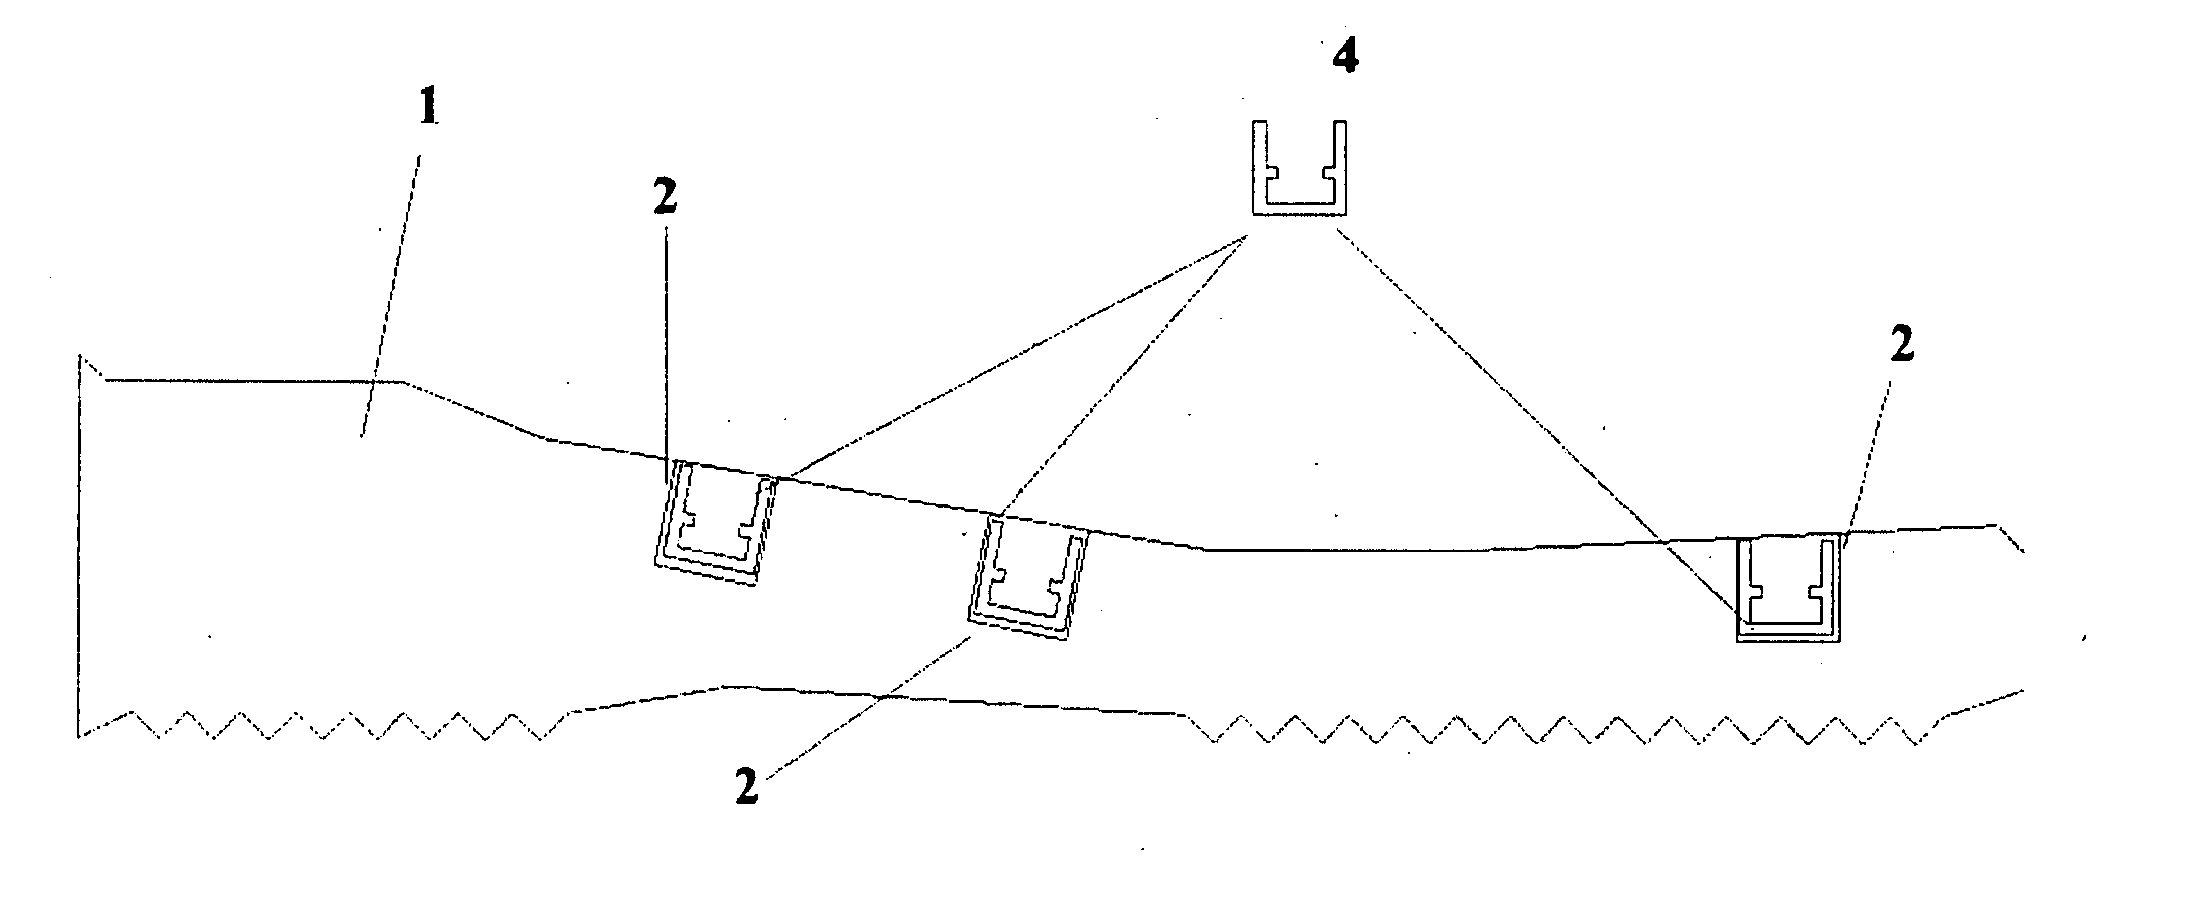 Interchangeable sandal and related methods